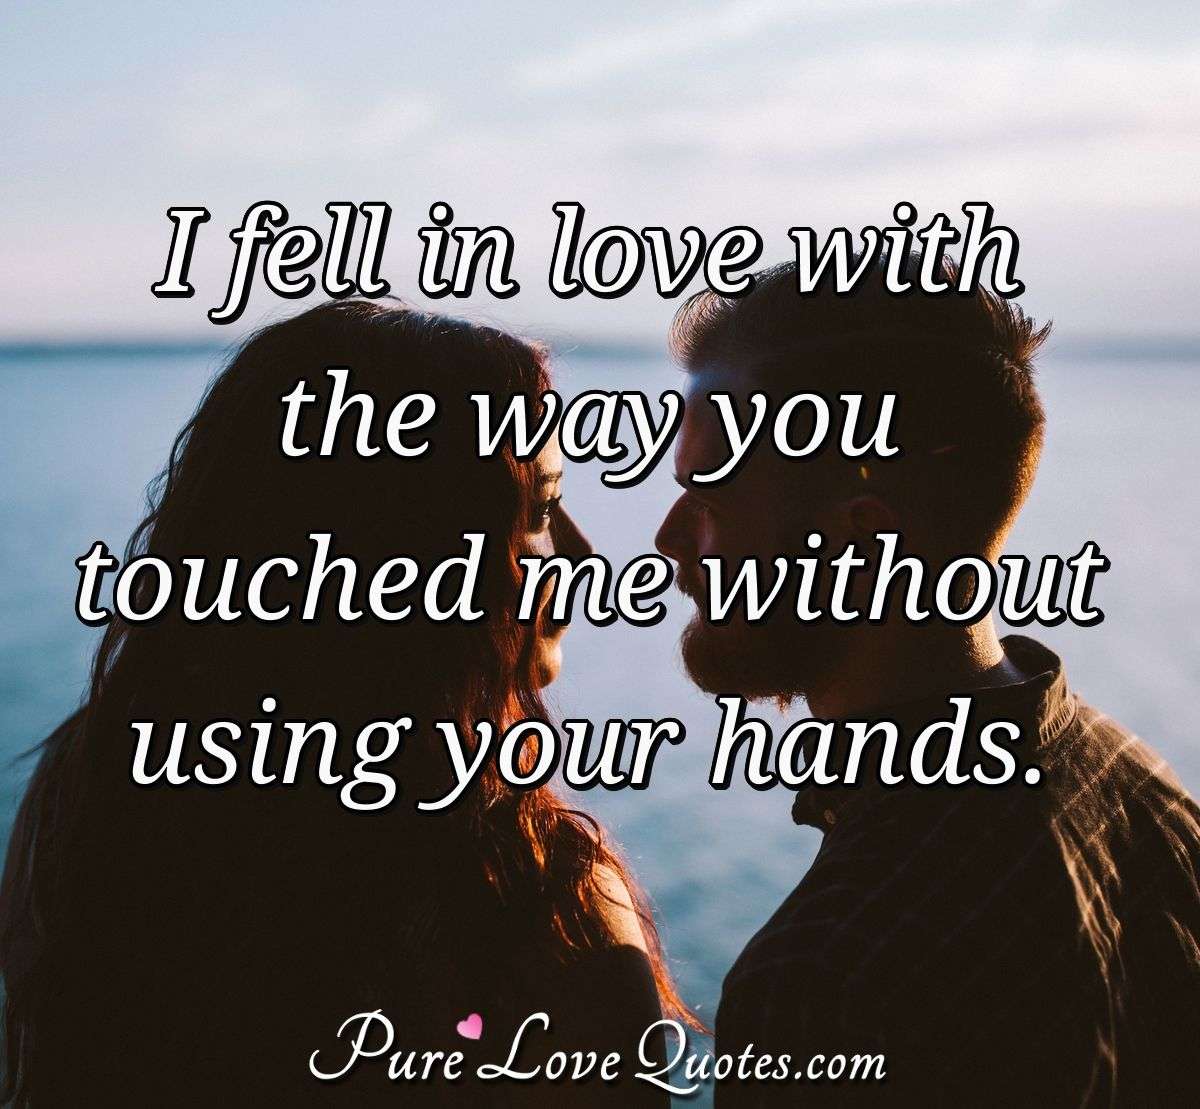 Me like you this when touch Help me